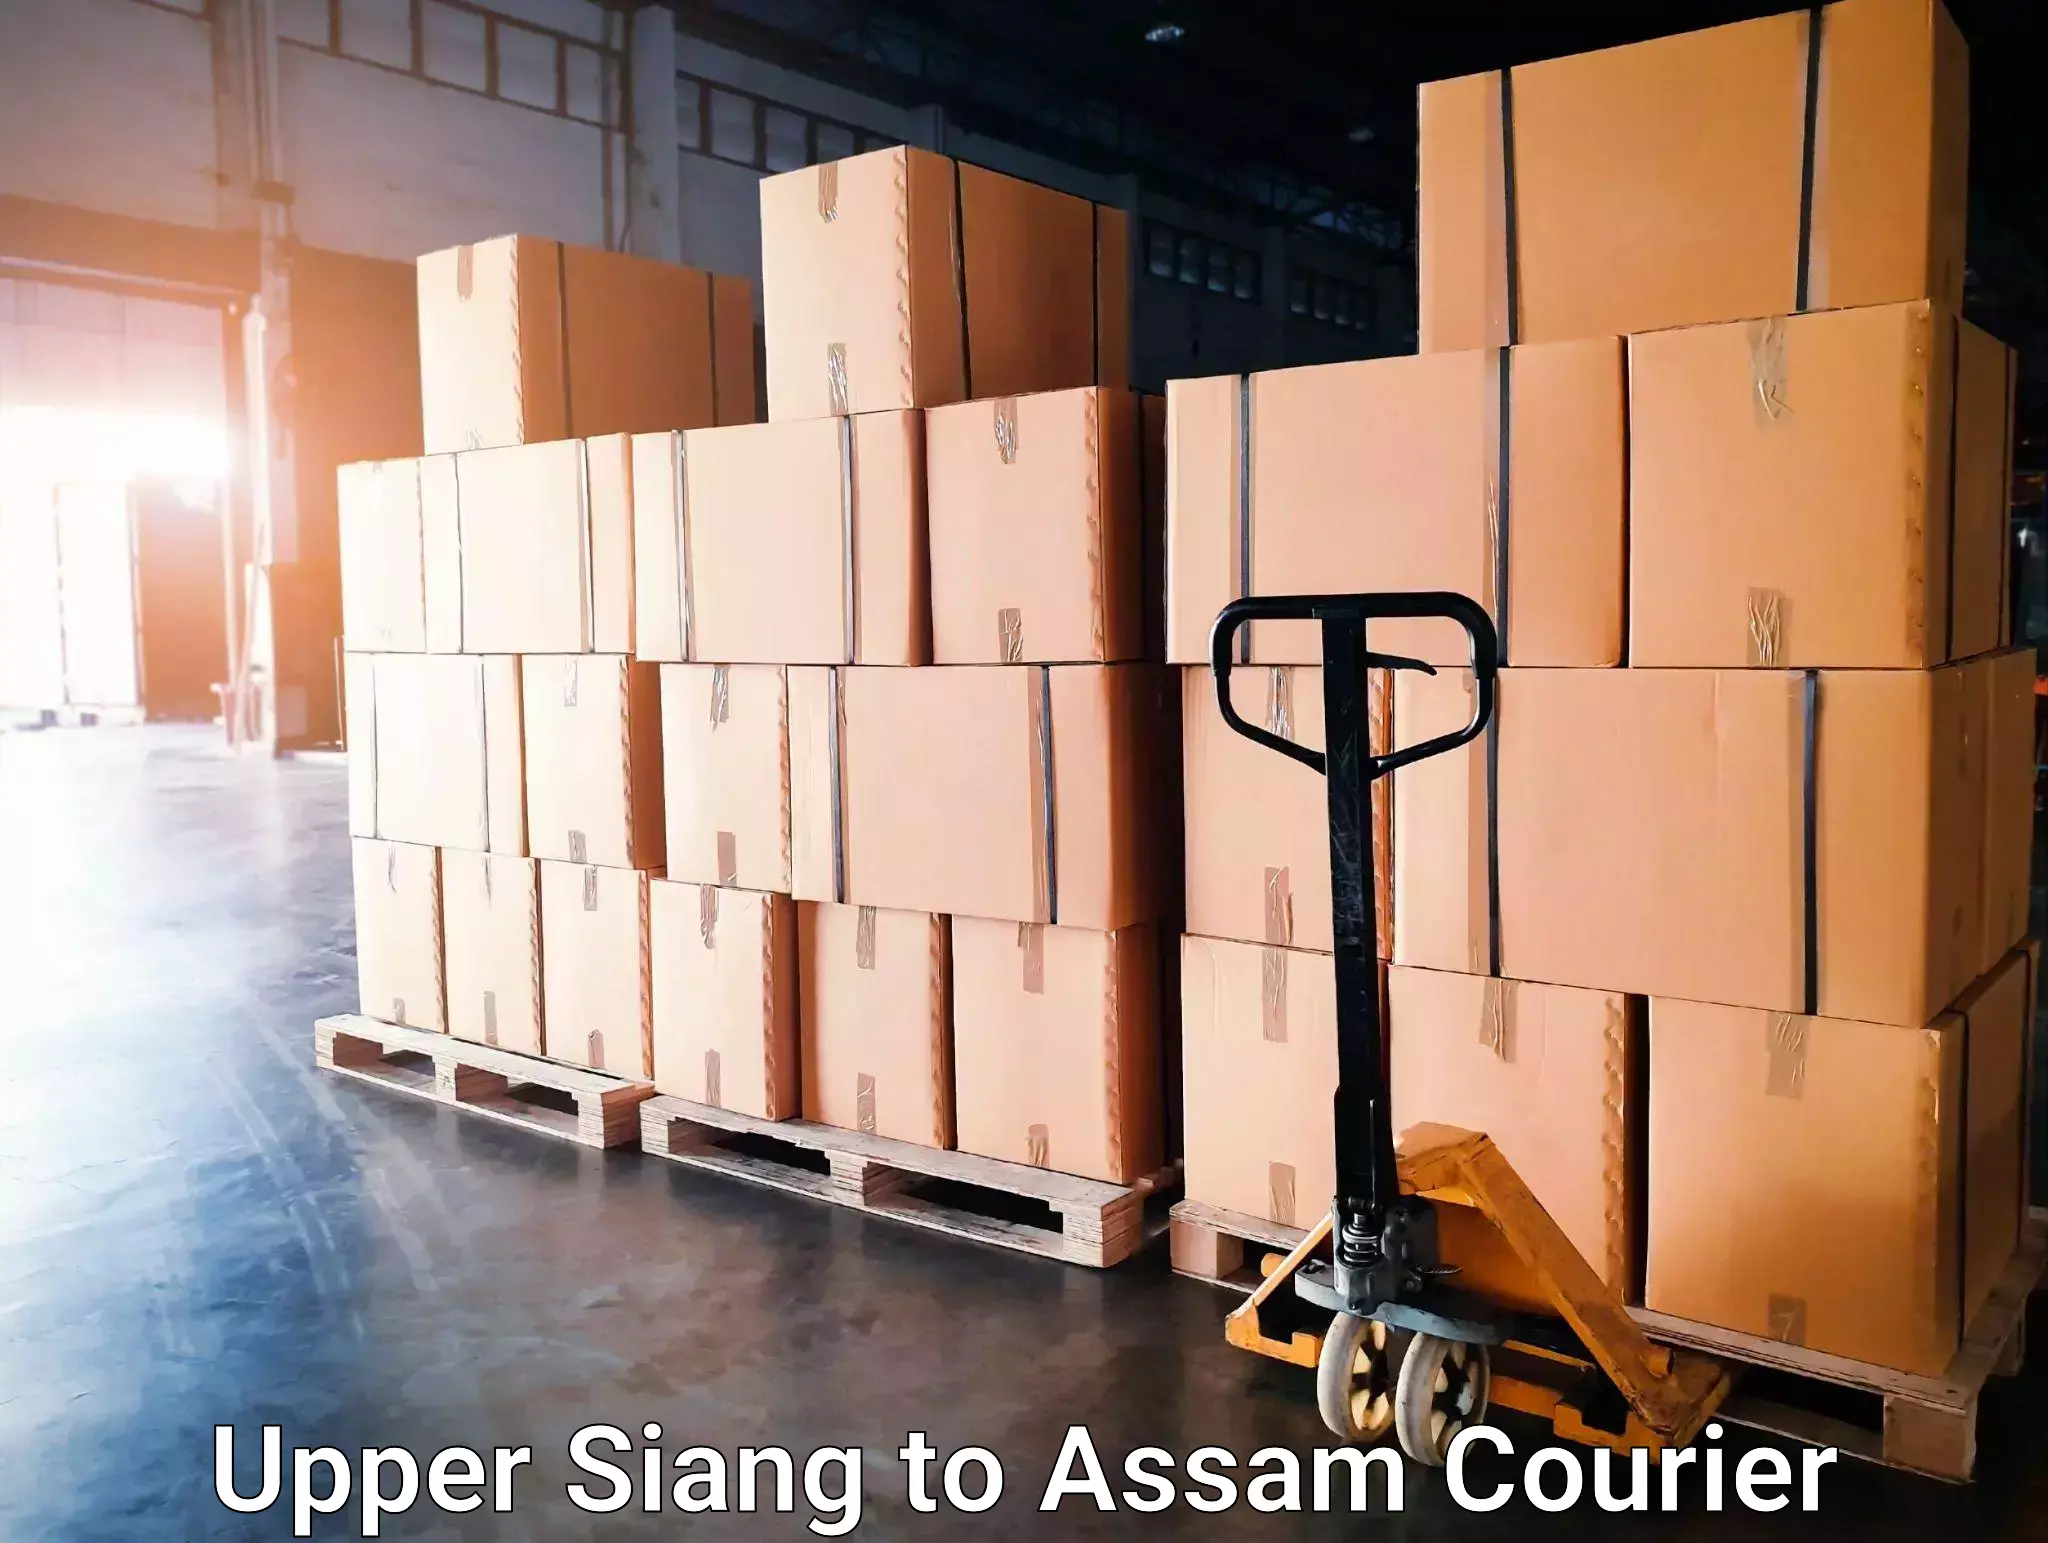 24/7 courier service in Upper Siang to Majuli